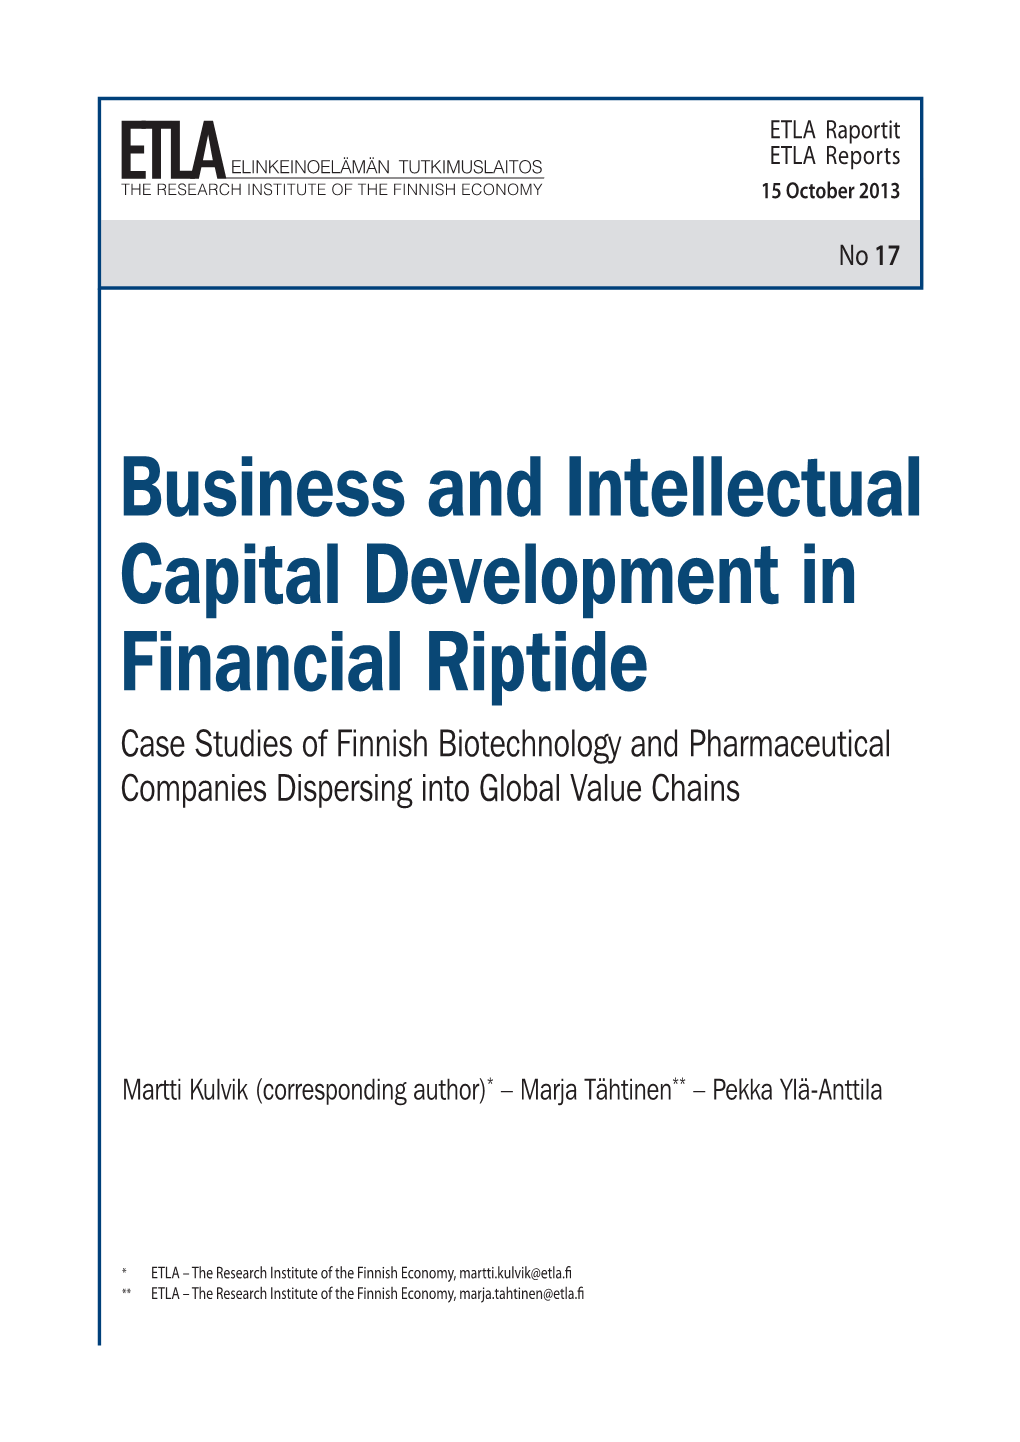 Business and Intellectual Capital Development in Financial Riptide